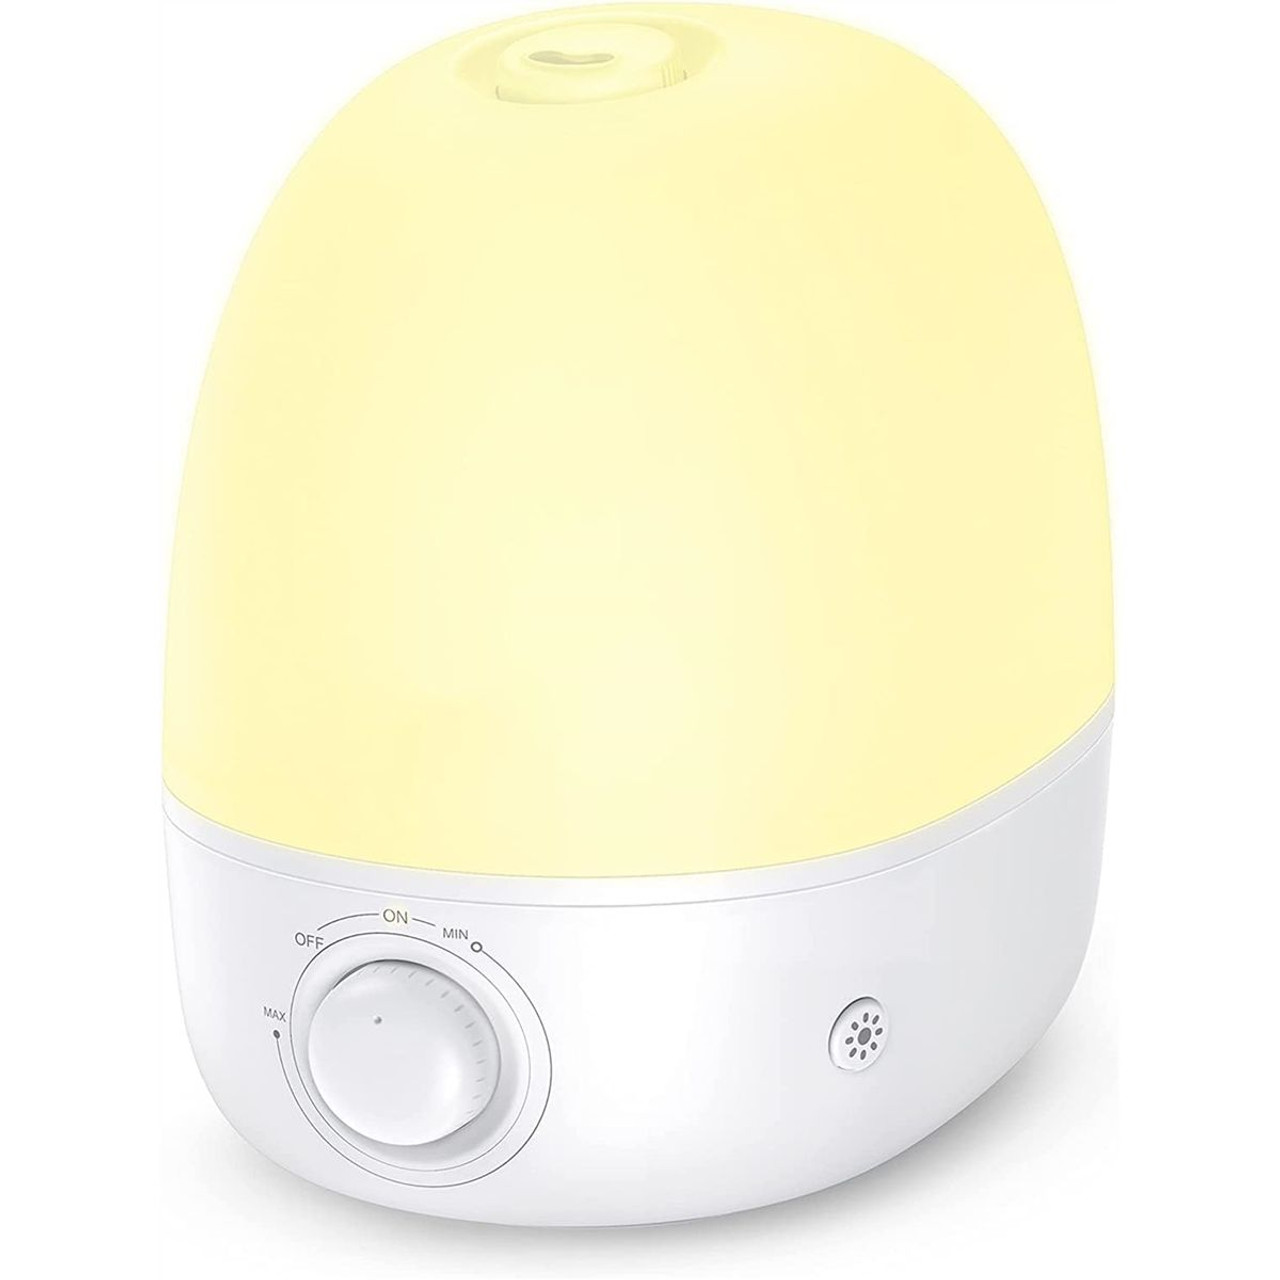 3-in-1 Humidifier, Night Light, and Essential Oil Fragrance Diffuser product image